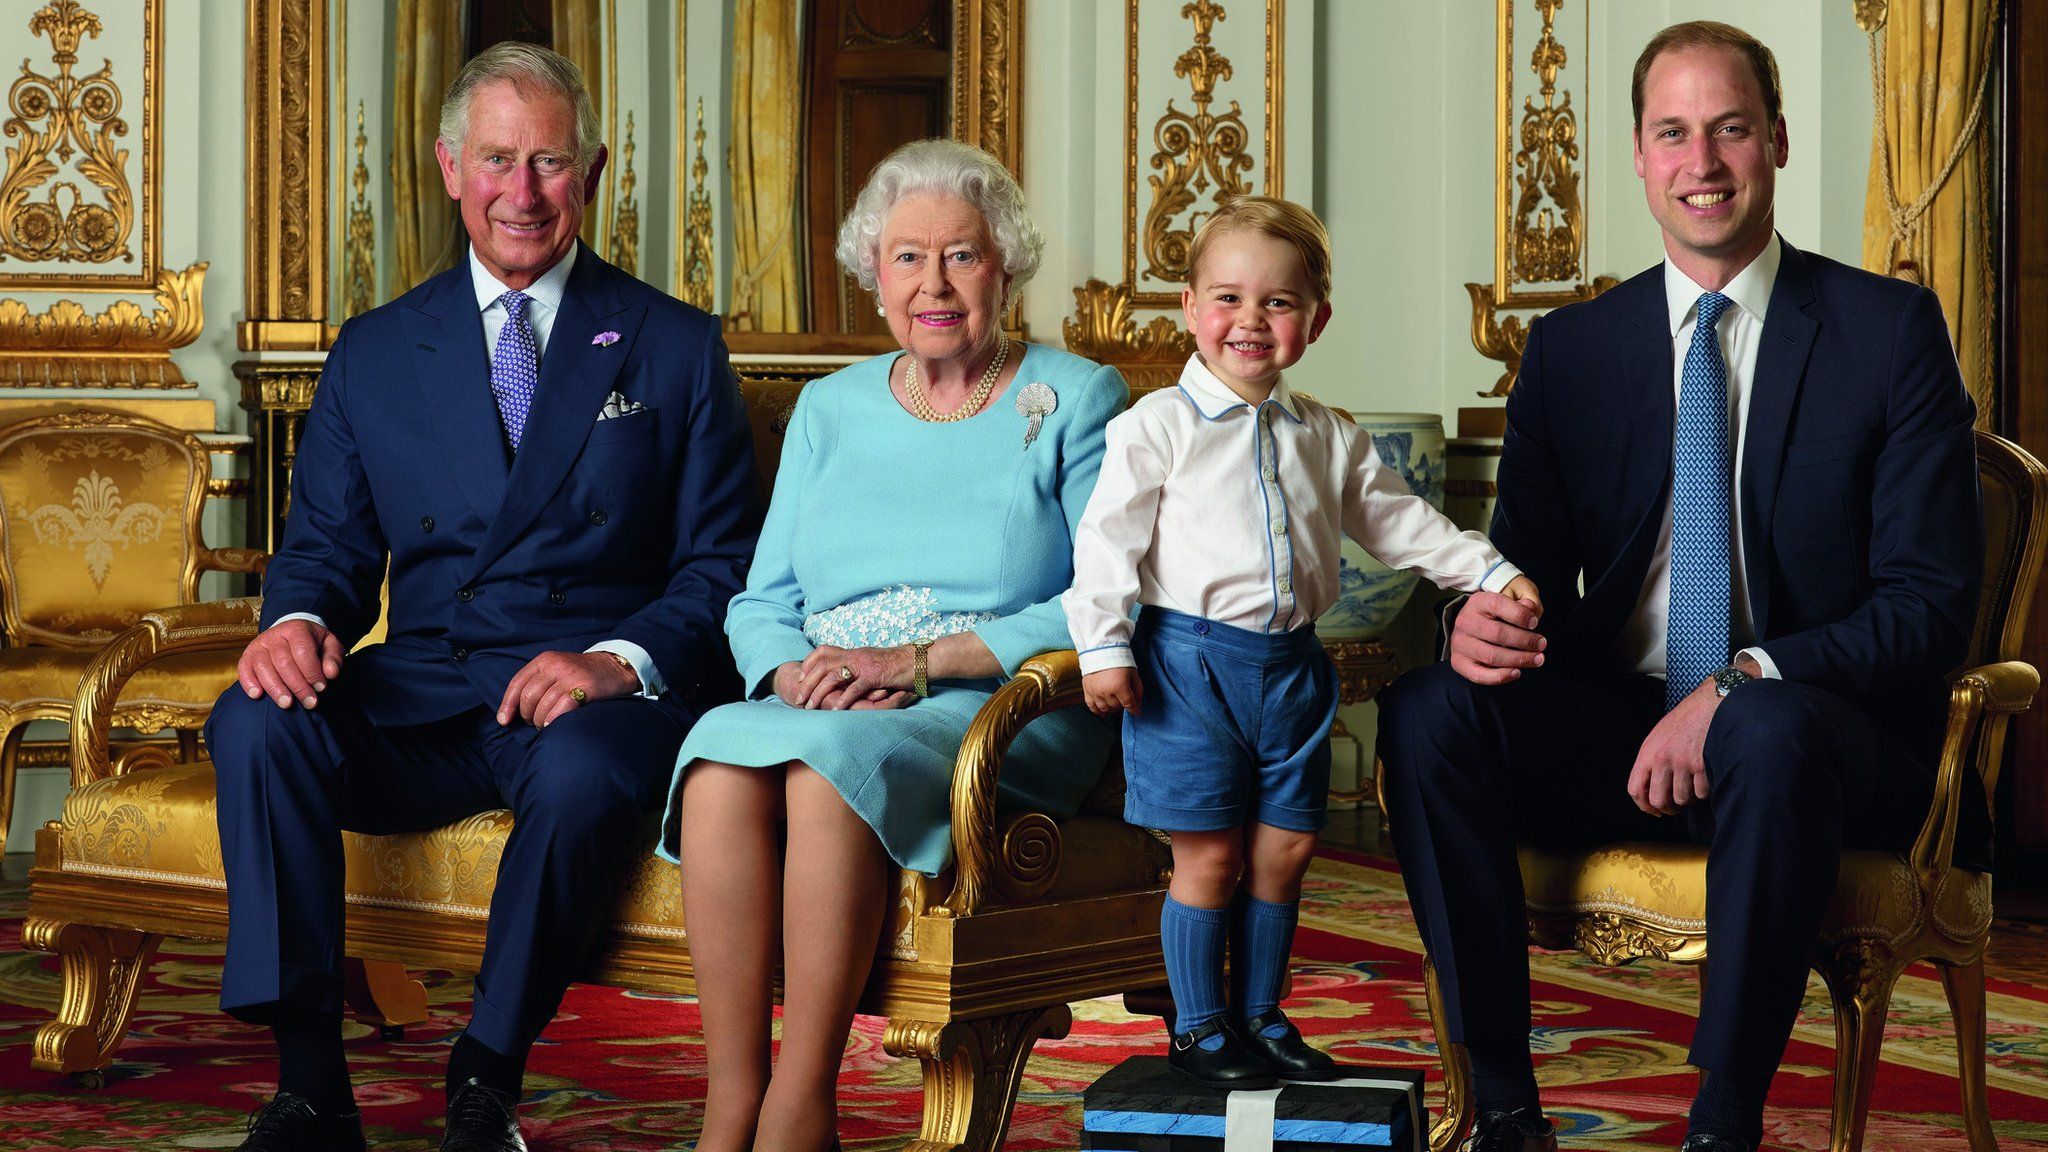 Prince George stands on foam blocks during a Royal Mail photo shoot for a stamp sheet to mark the Queen's 90th birthday. The sheet also features - Prince Charles, the Queen and Prince William